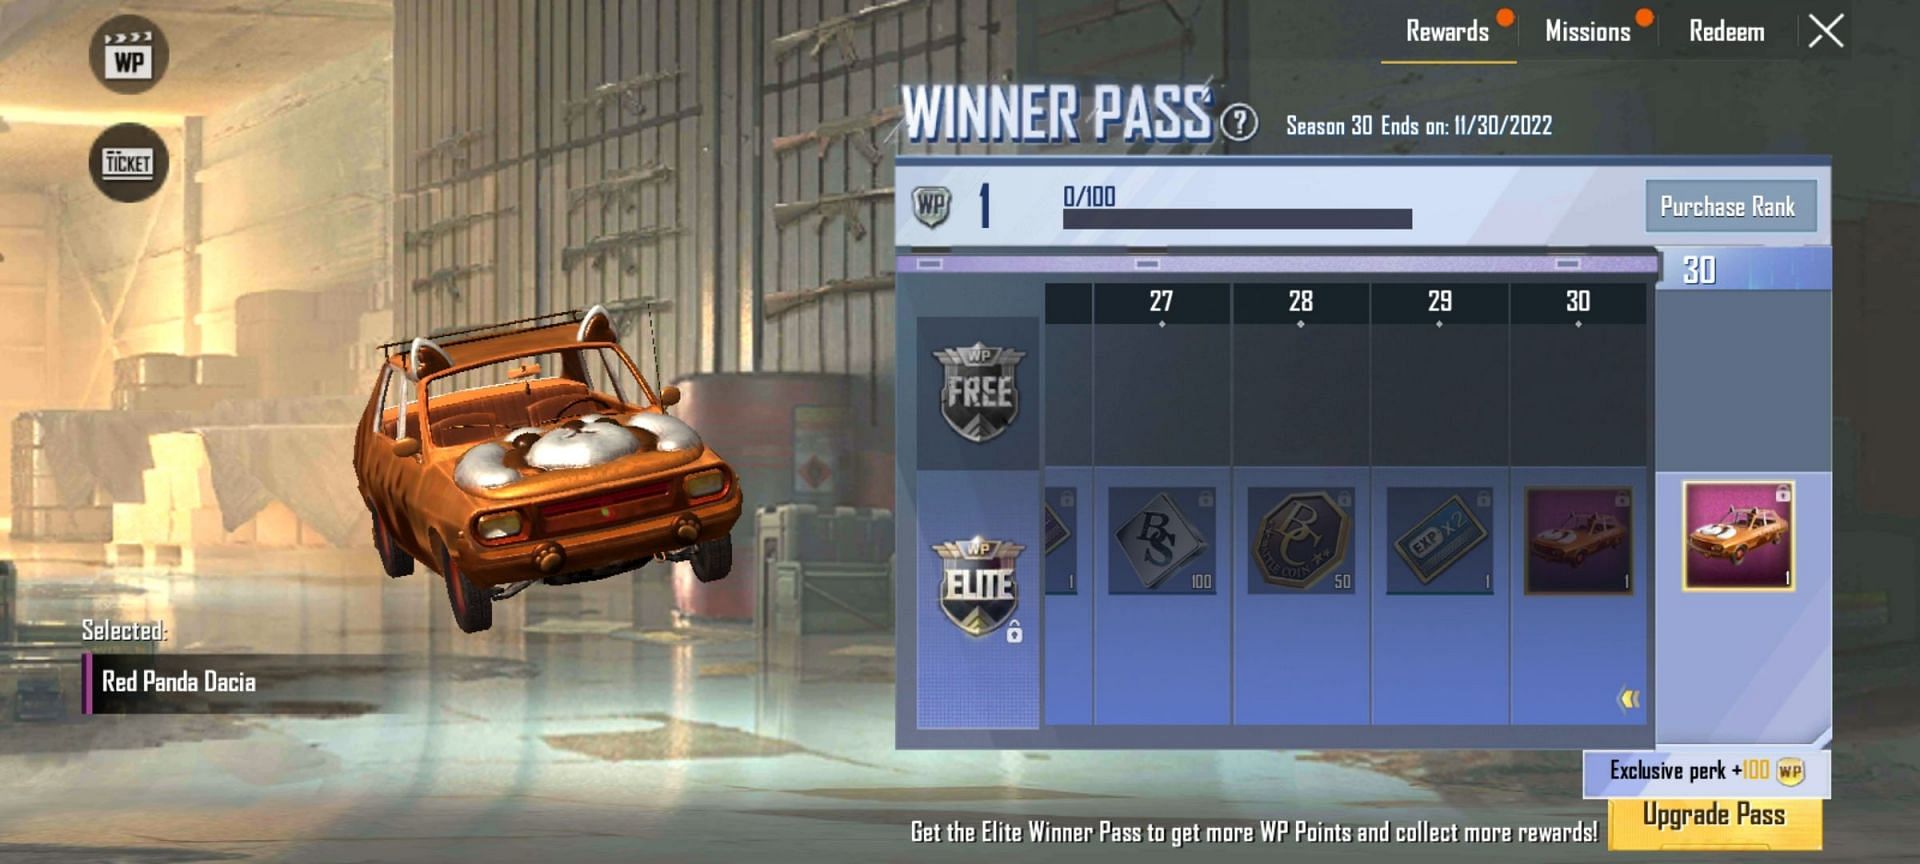 On the highest level, gamers will get the Dacia skin (Image via PUBG Mobile Lite)